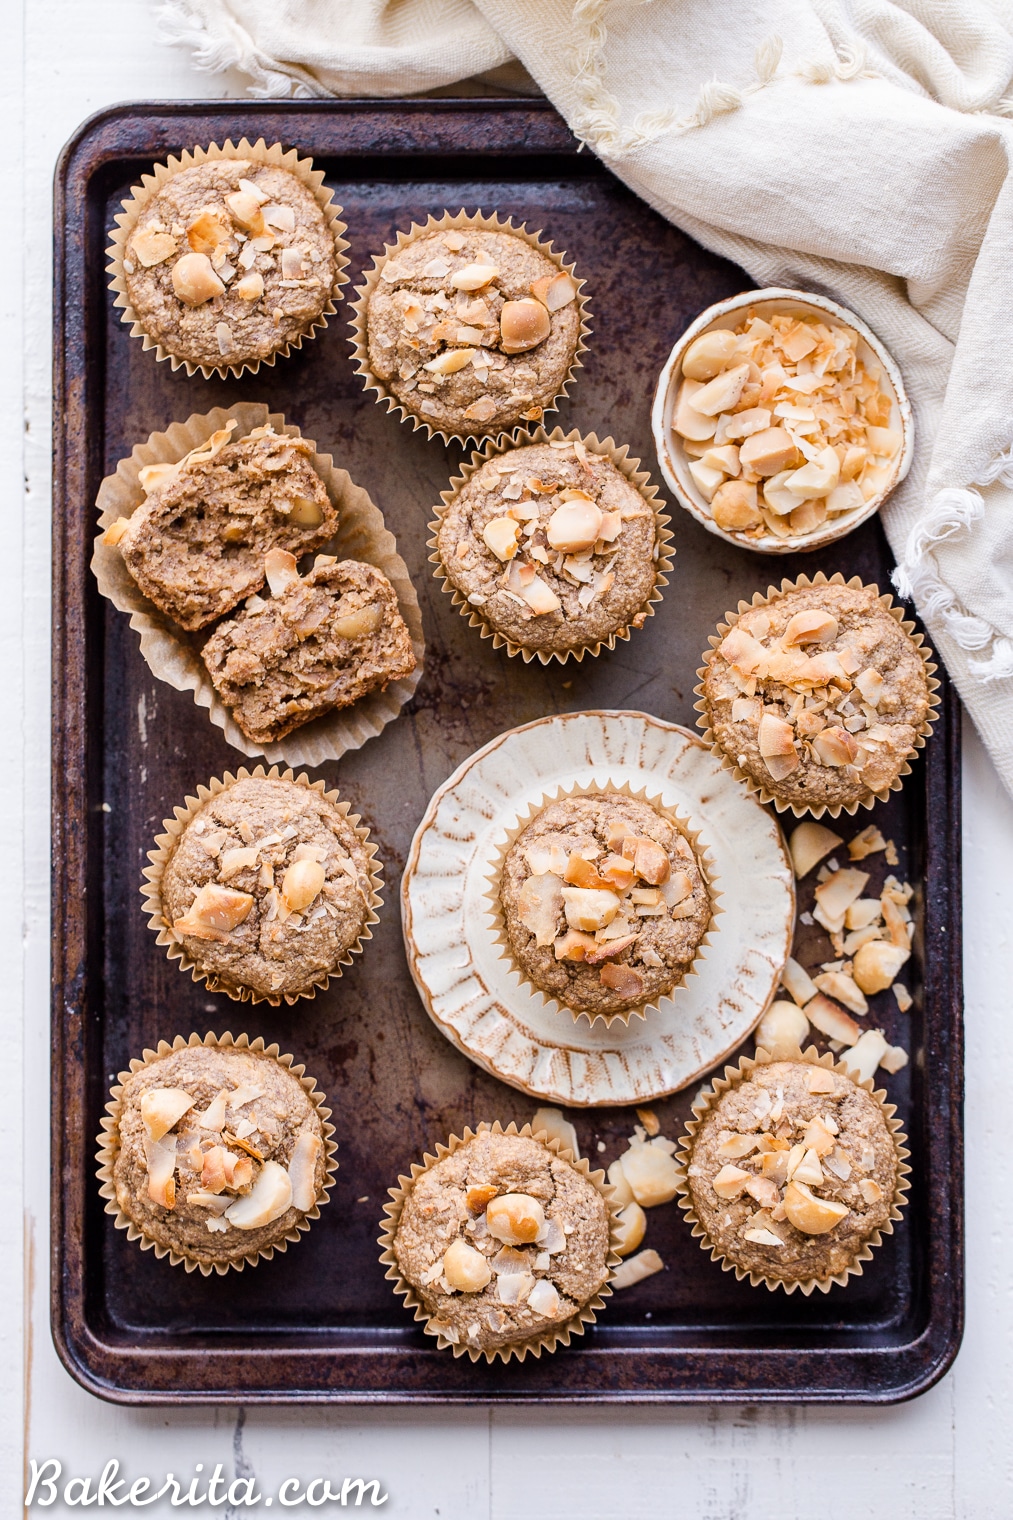 These Macadamia Nut Coconut Banana Muffins are tender, moist, and perfectly sweet for breakfast. Slathered with a little jam or nut butter, these gluten-free and vegan banana muffins make a wonderful snack or breakfast that will keep you satiated for hours.